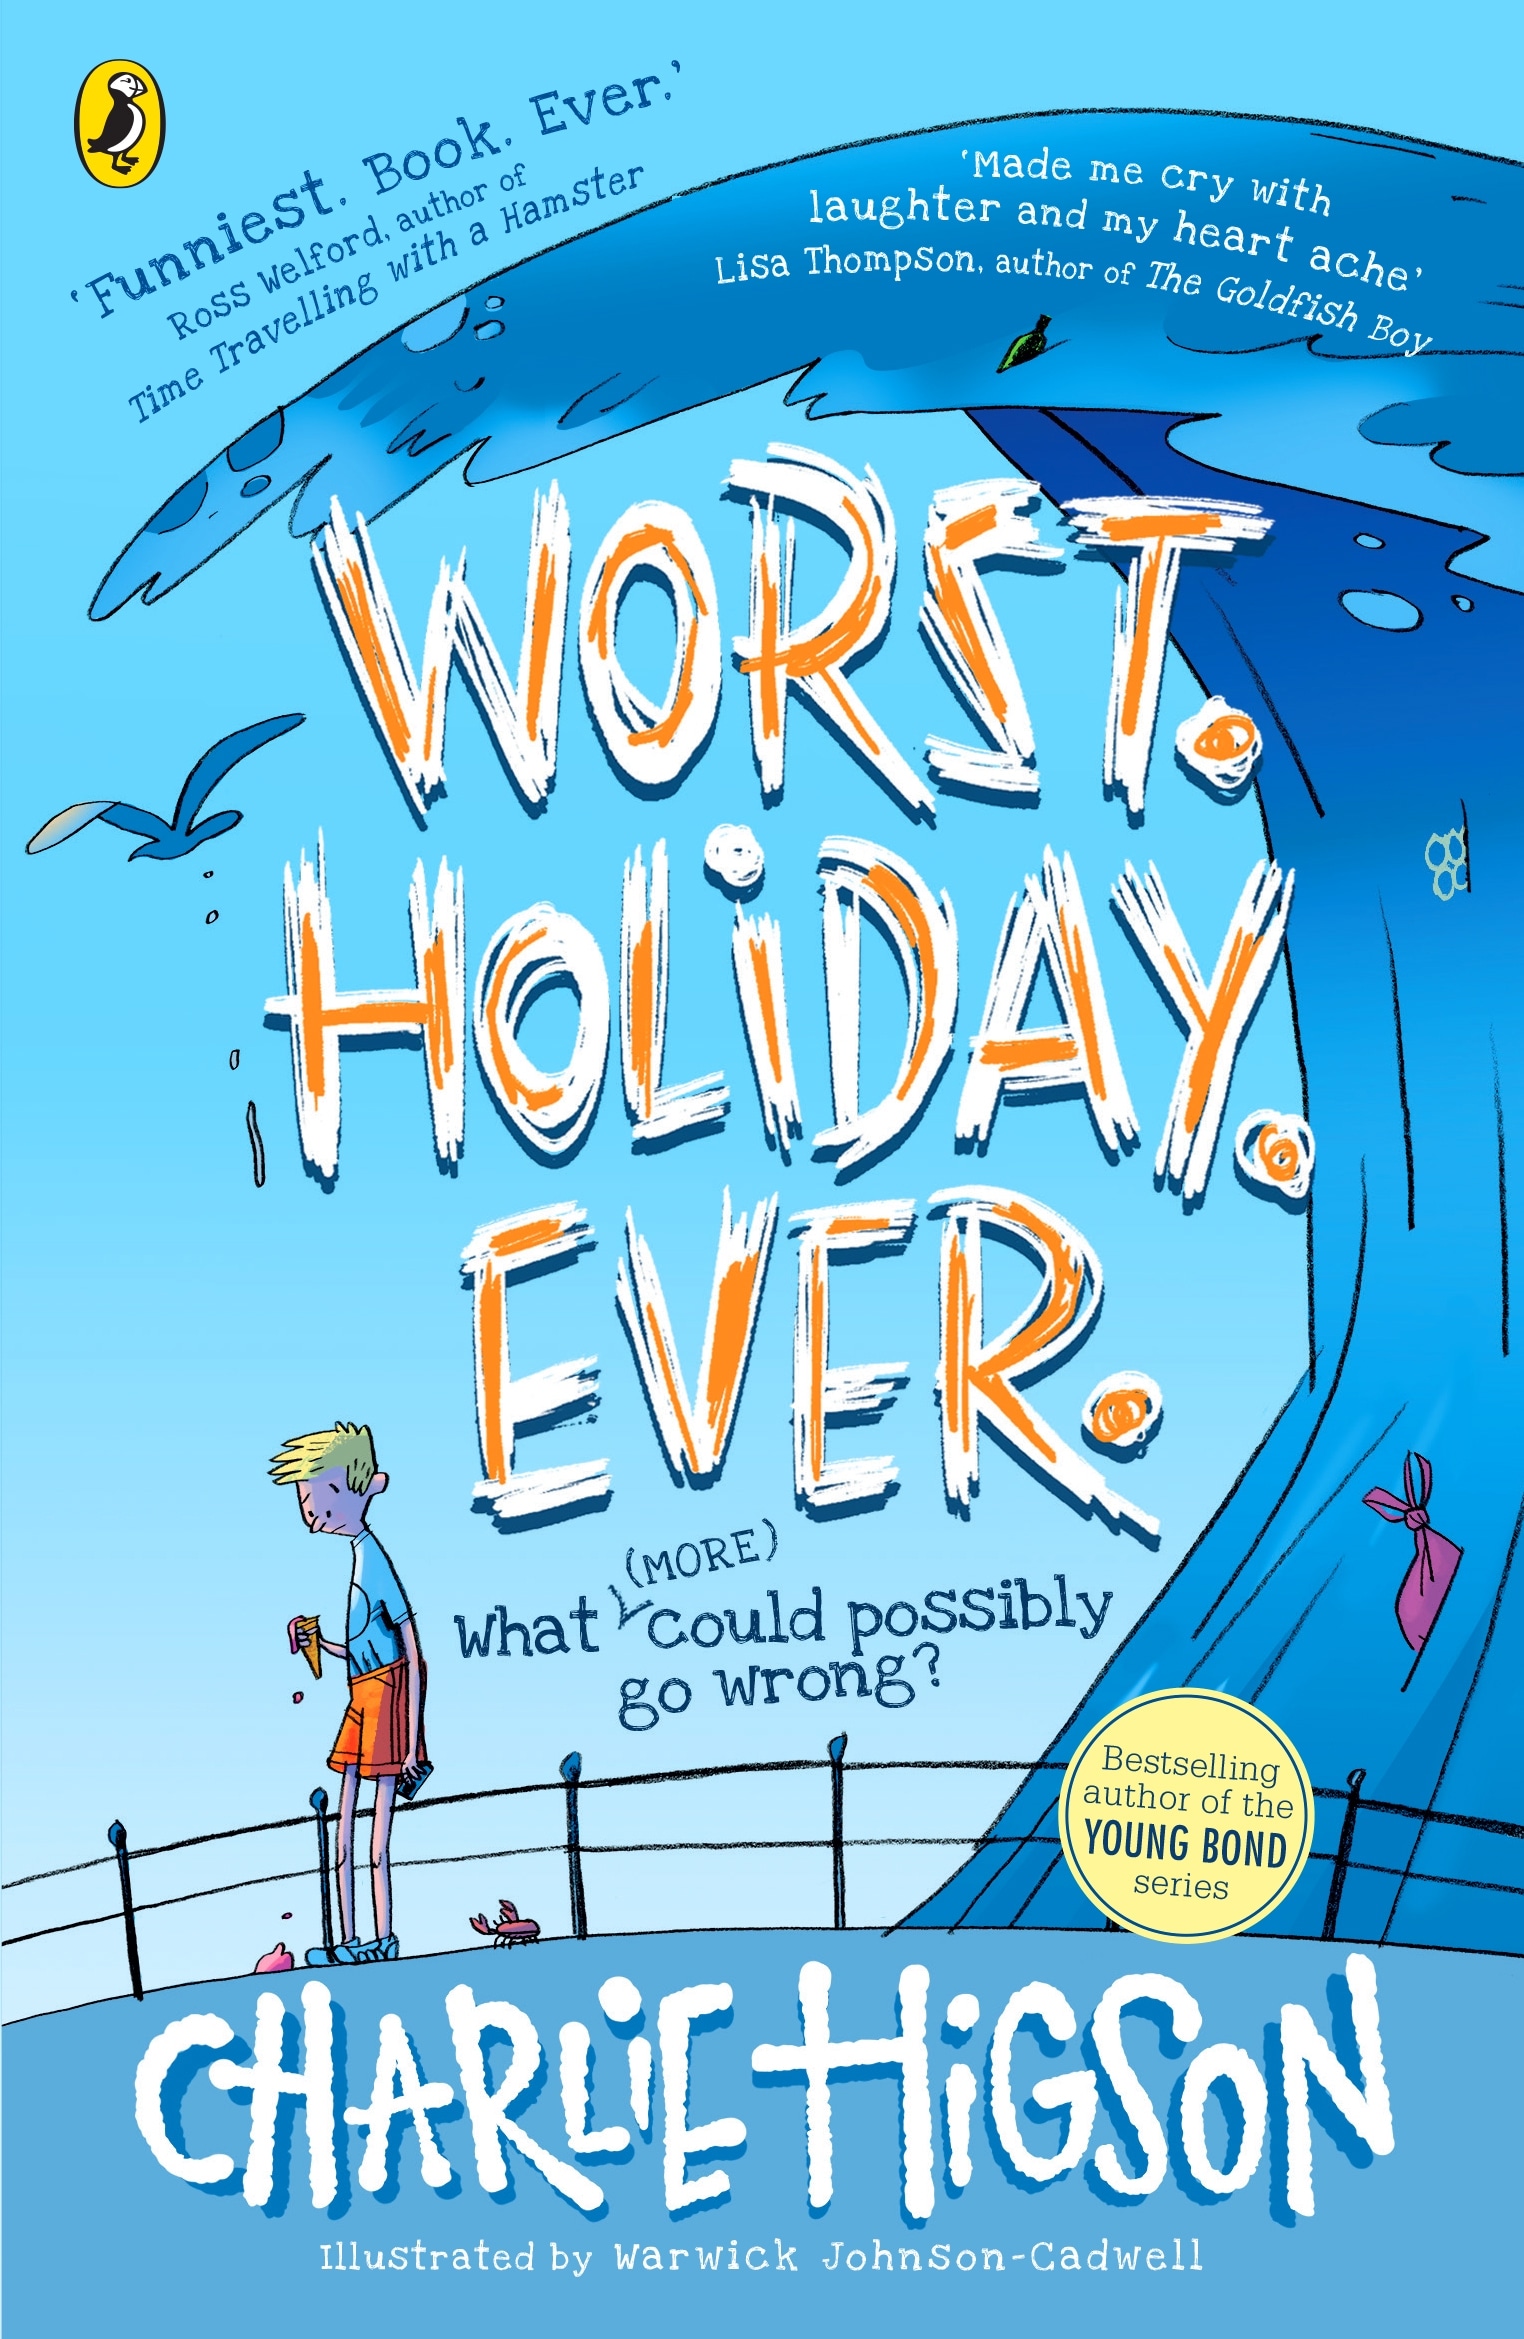 Book “Worst. Holiday. Ever” by Charlie Higson — April 29, 2021